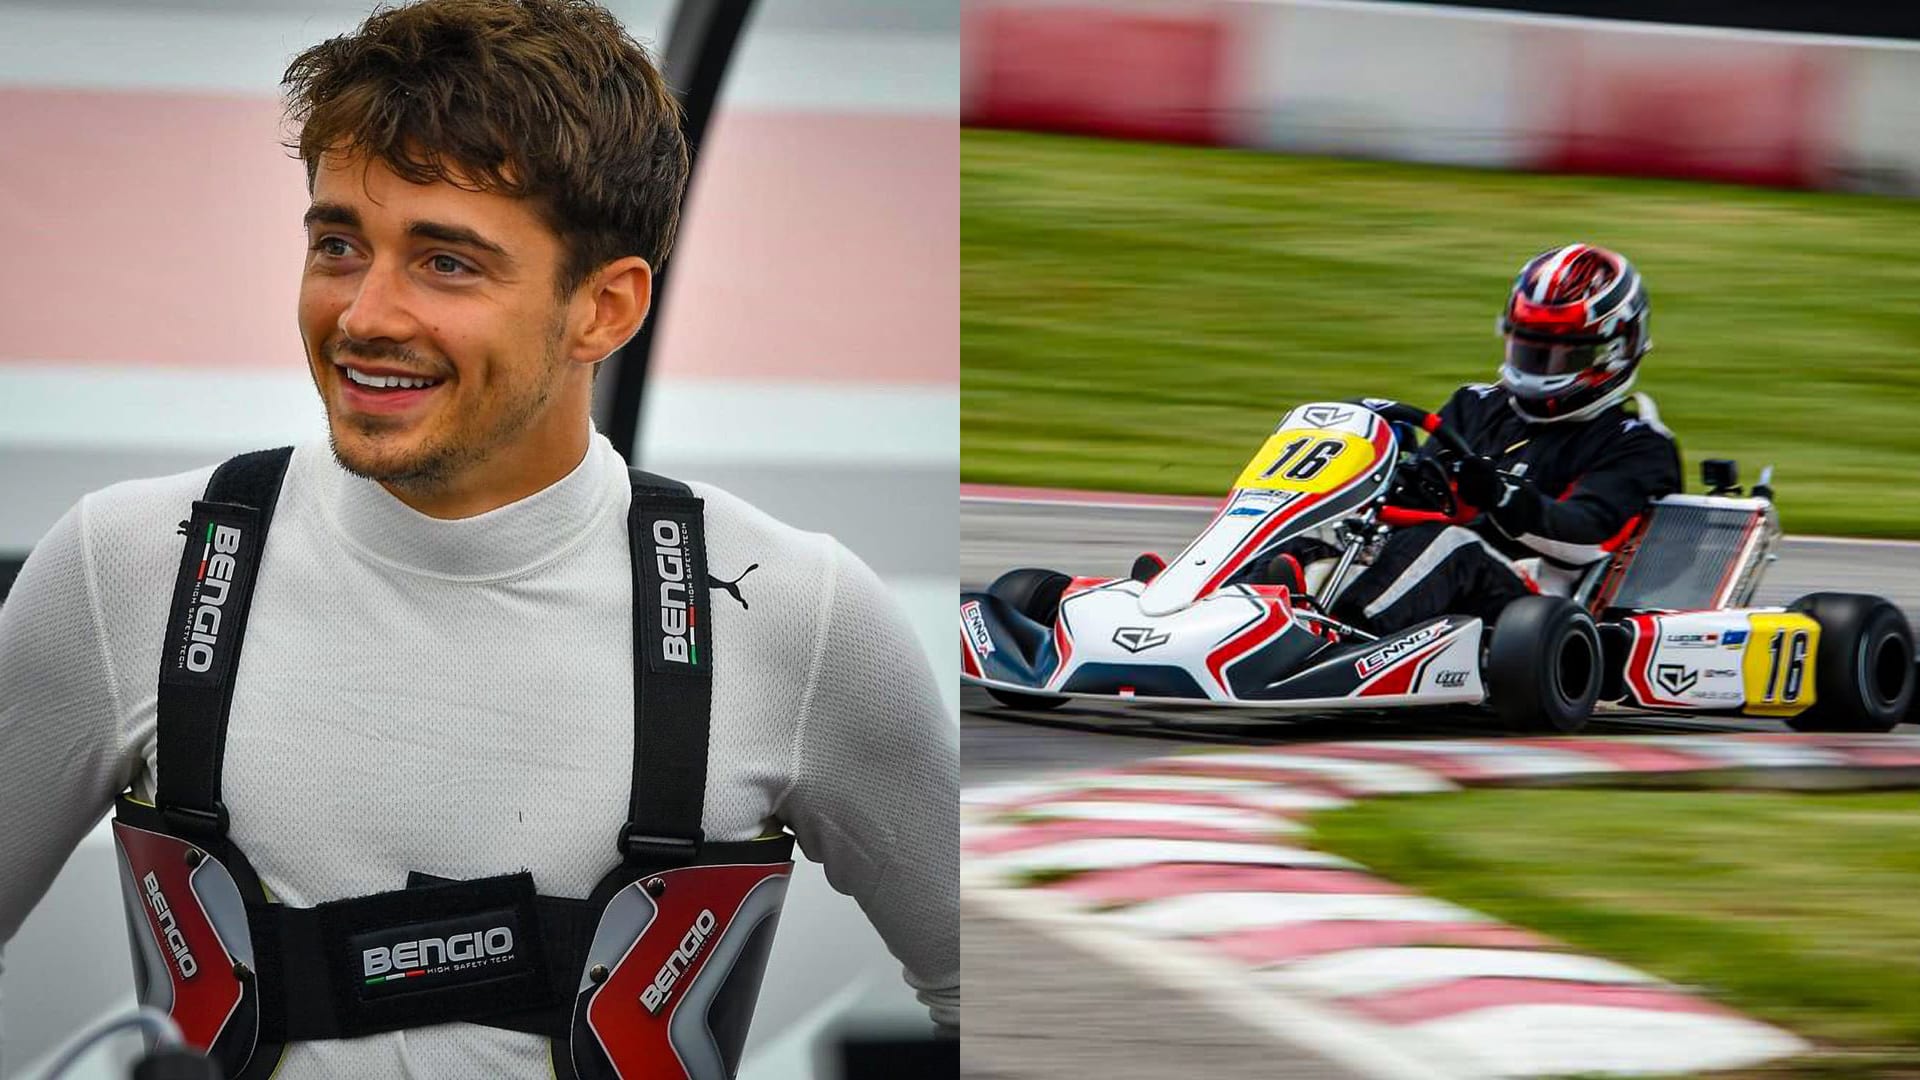 24H KARTING OF ITALY: 5 THINGS TO KNOW ACCORDING TO TEAM MANAGERS